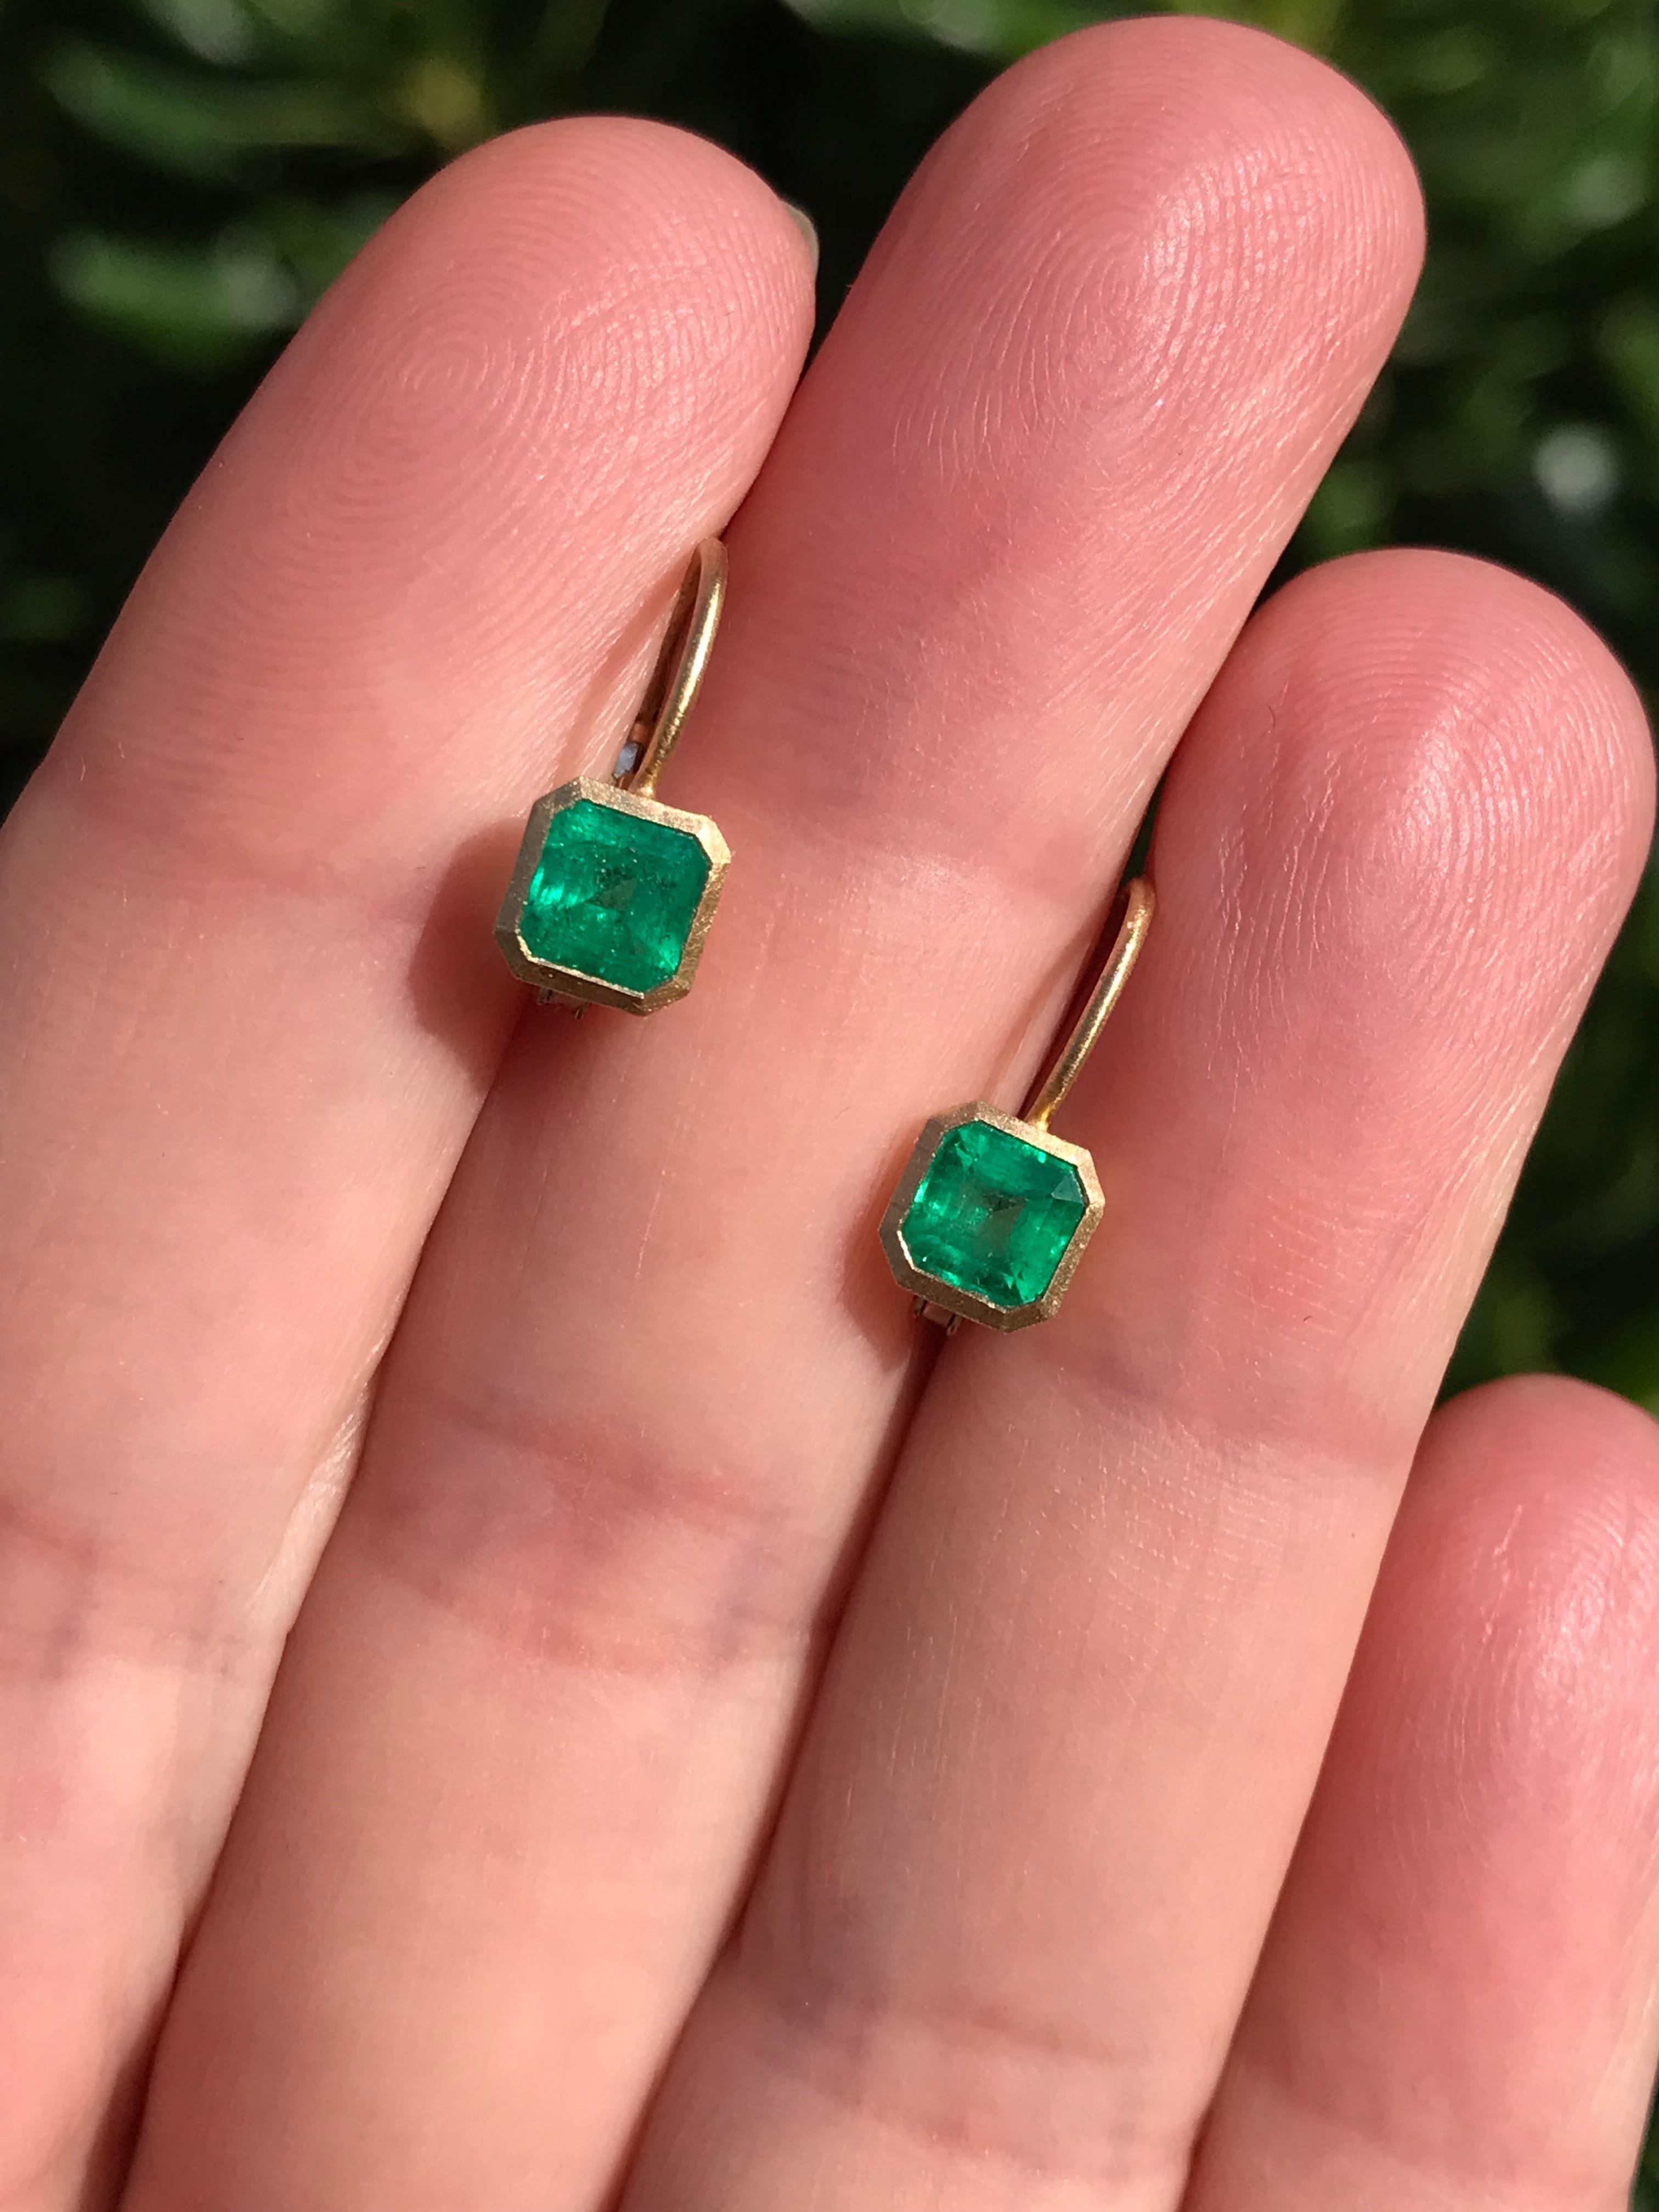 Emerald Cut Dalben 0.91 Carat Colombian Emerald Yellow Gold Tiny Earrings For Sale